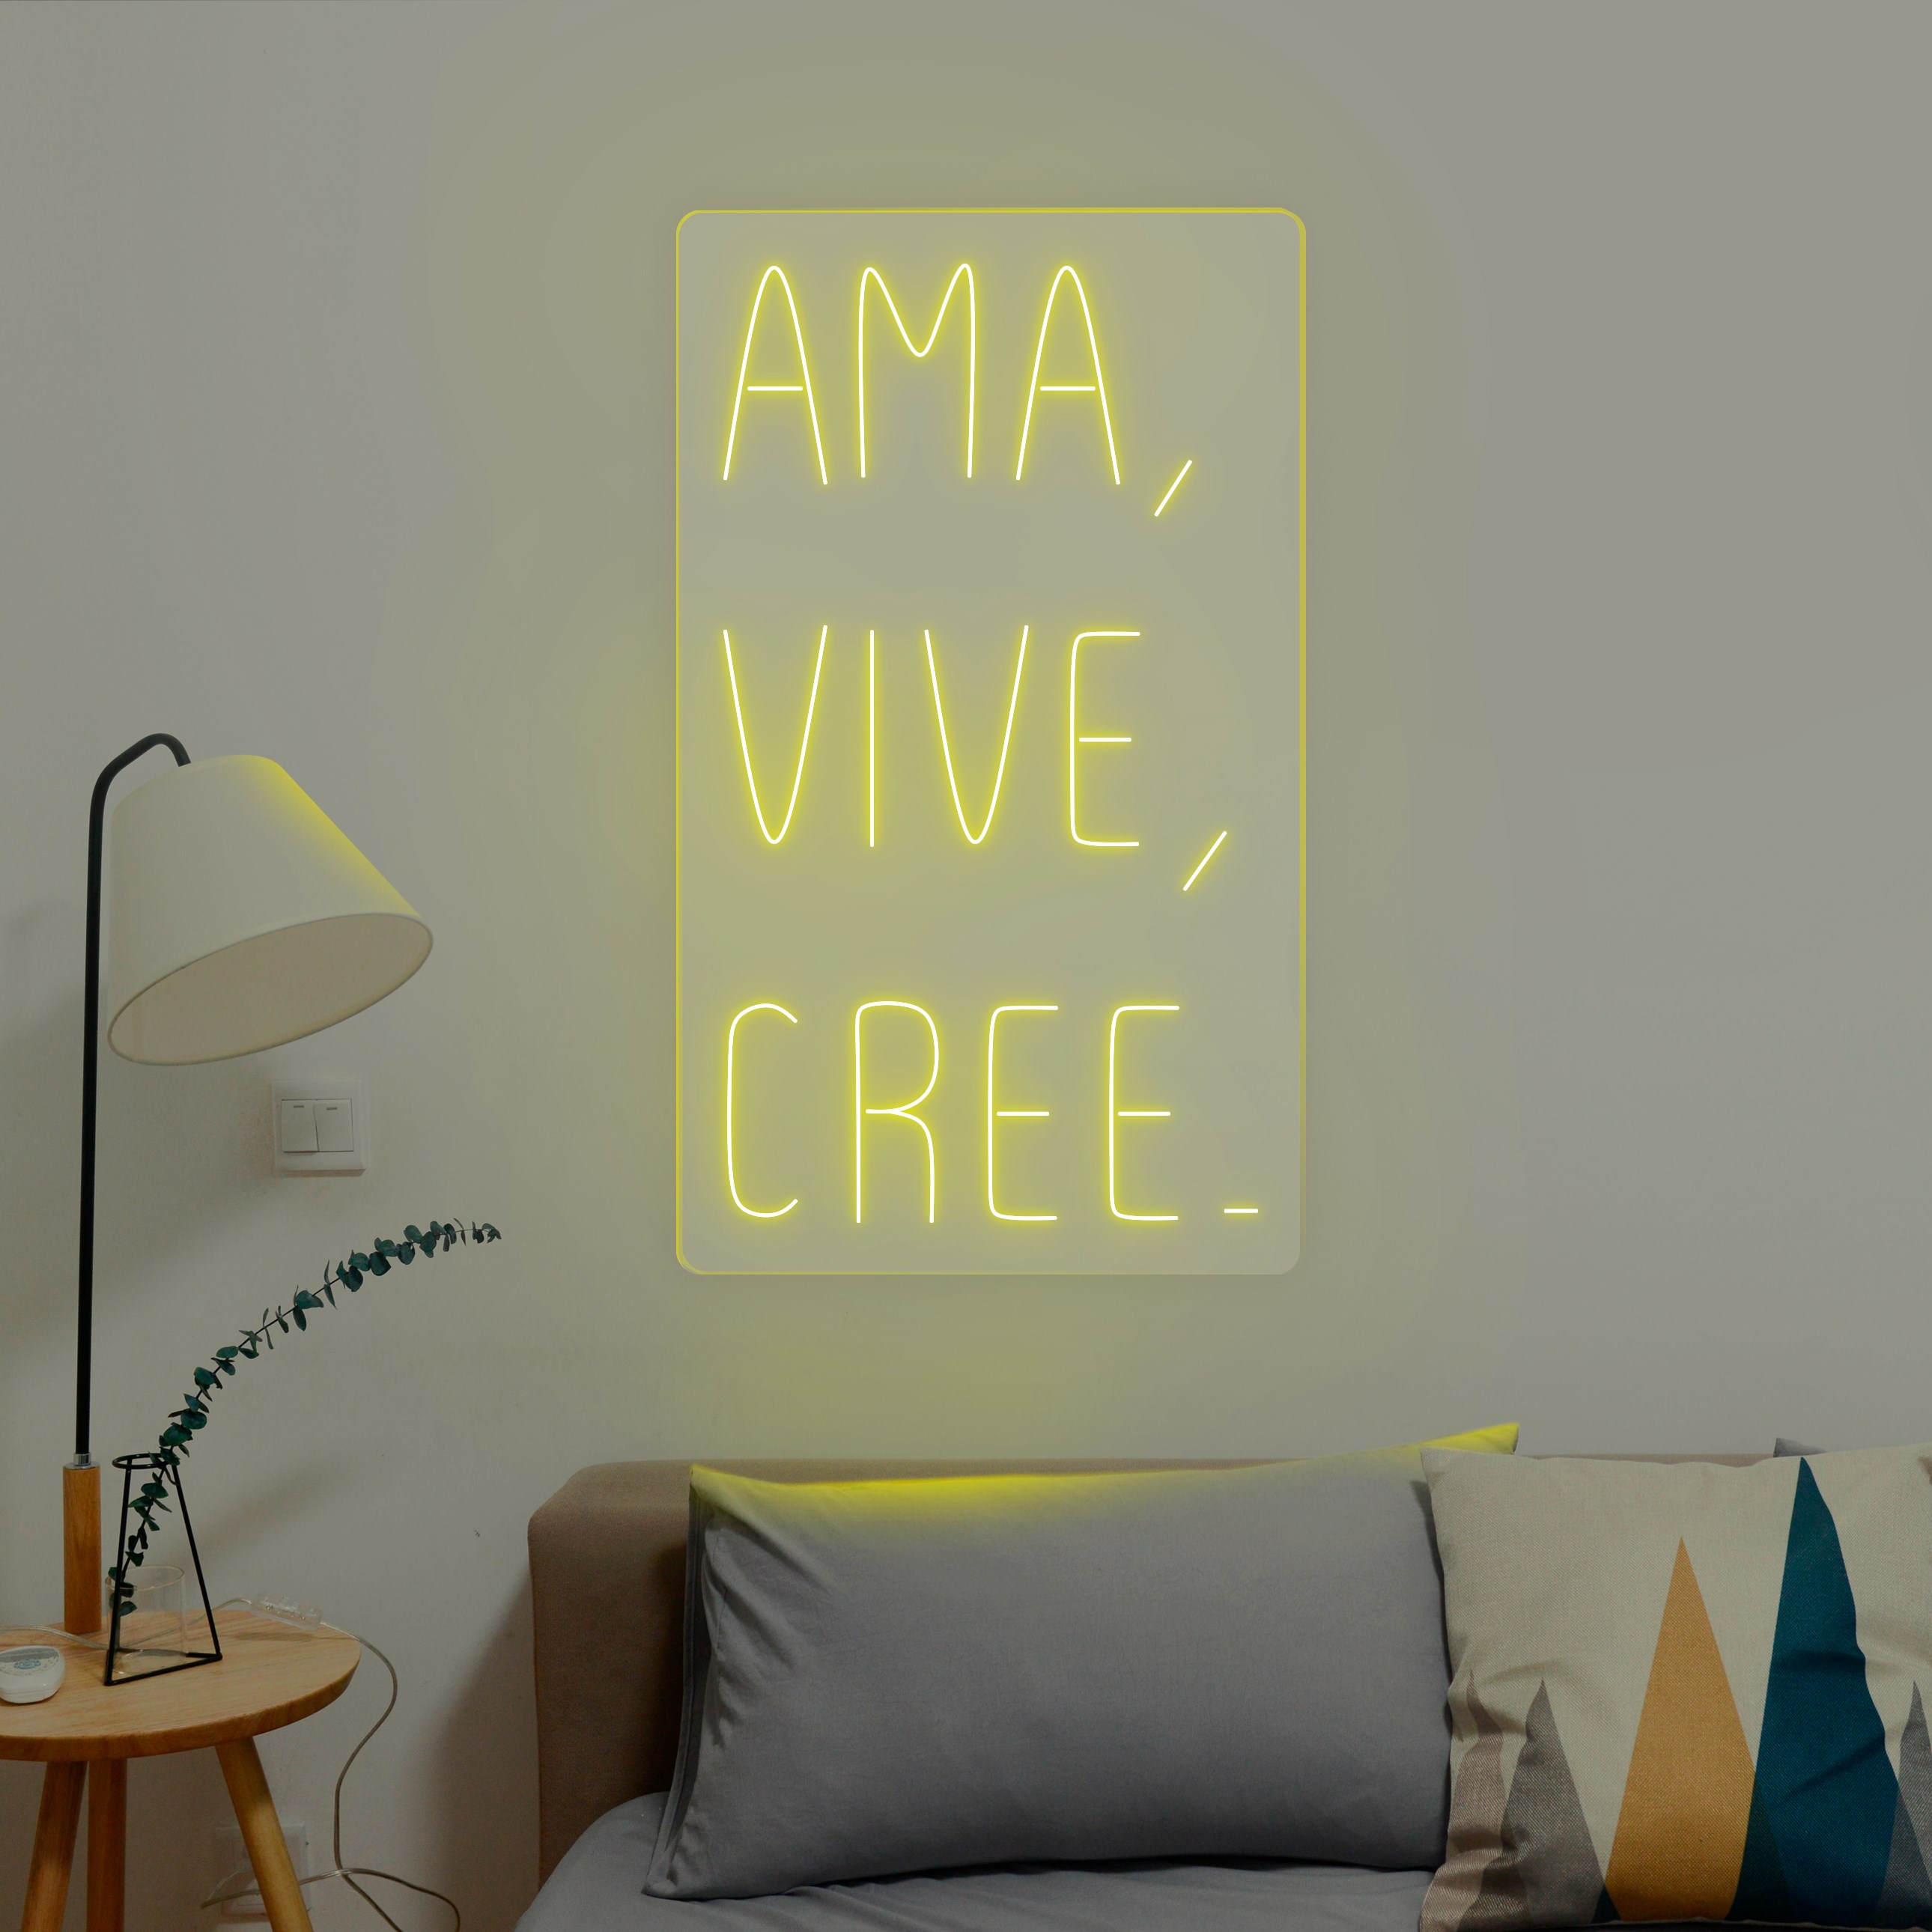 Picture of Neón frase "ama, vive, cree"